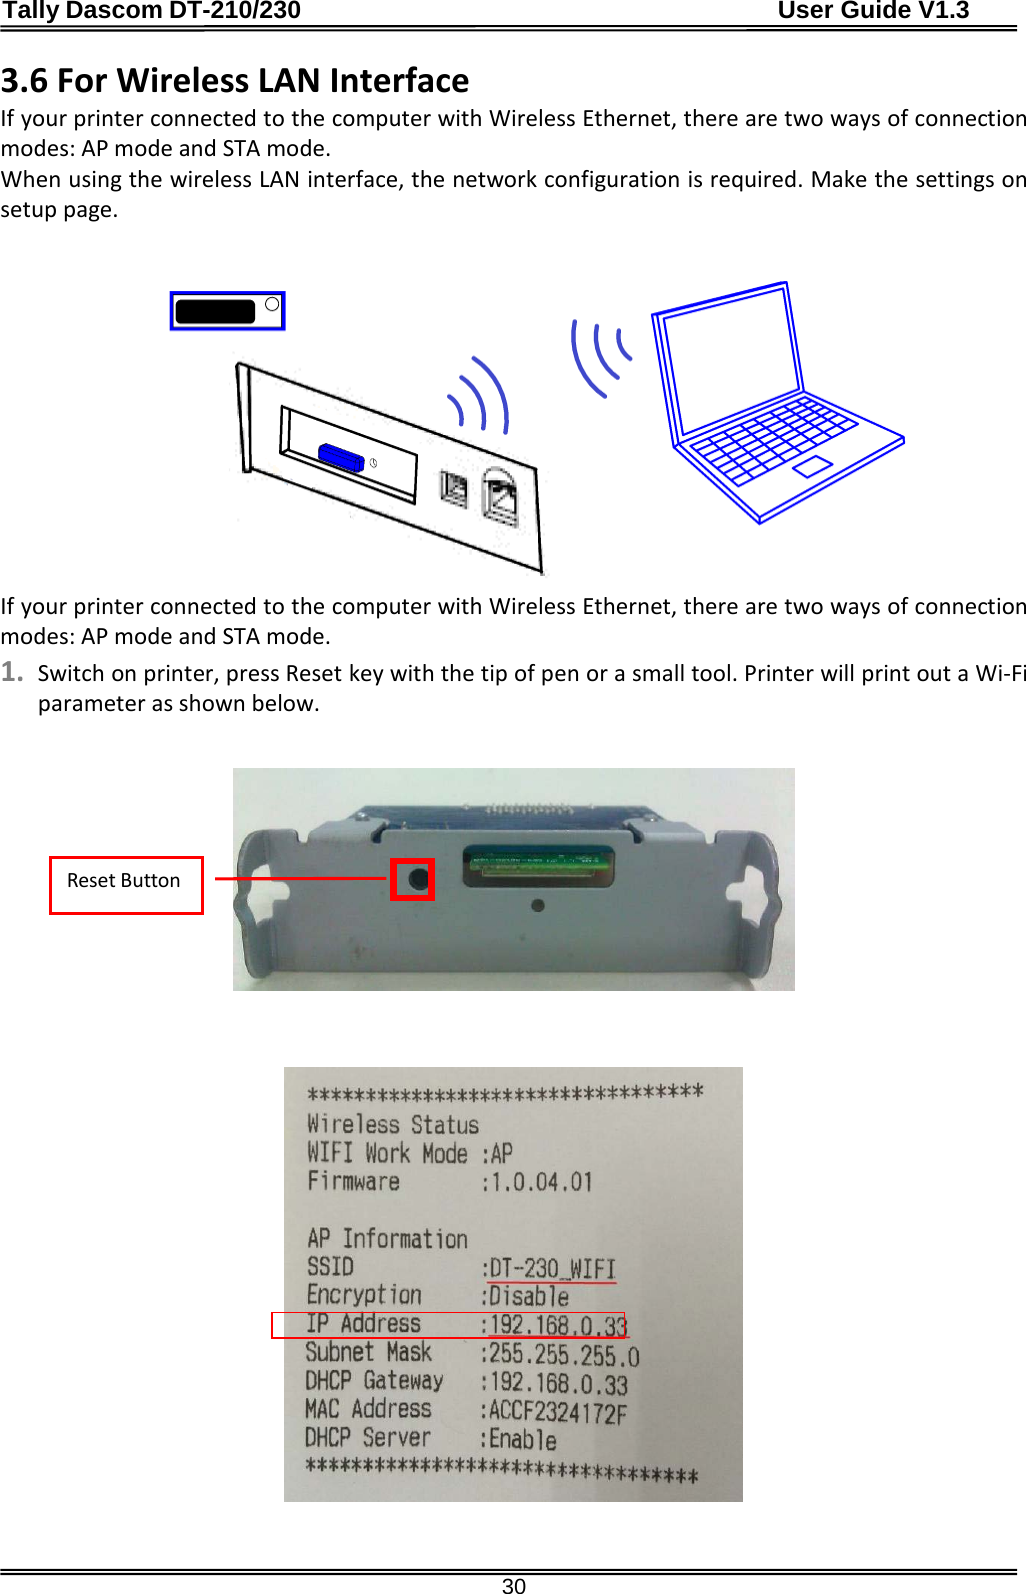 Tally Dascom DT-210/230                                      User Guide V1.3  30 3.6 For Wireless LAN Interface If your printer connected to the computer with Wireless Ethernet, there are two ways of connection modes: AP mode and STA mode. When using the wireless LAN interface, the network configuration is required. Make the settings on setup page.    If your printer connected to the computer with Wireless Ethernet, there are two ways of connection modes: AP mode and STA mode. 1. Switch on printer, press Reset key with the tip of pen or a small tool. Printer will print out a Wi-Fi parameter as shown below.      Reset Button 